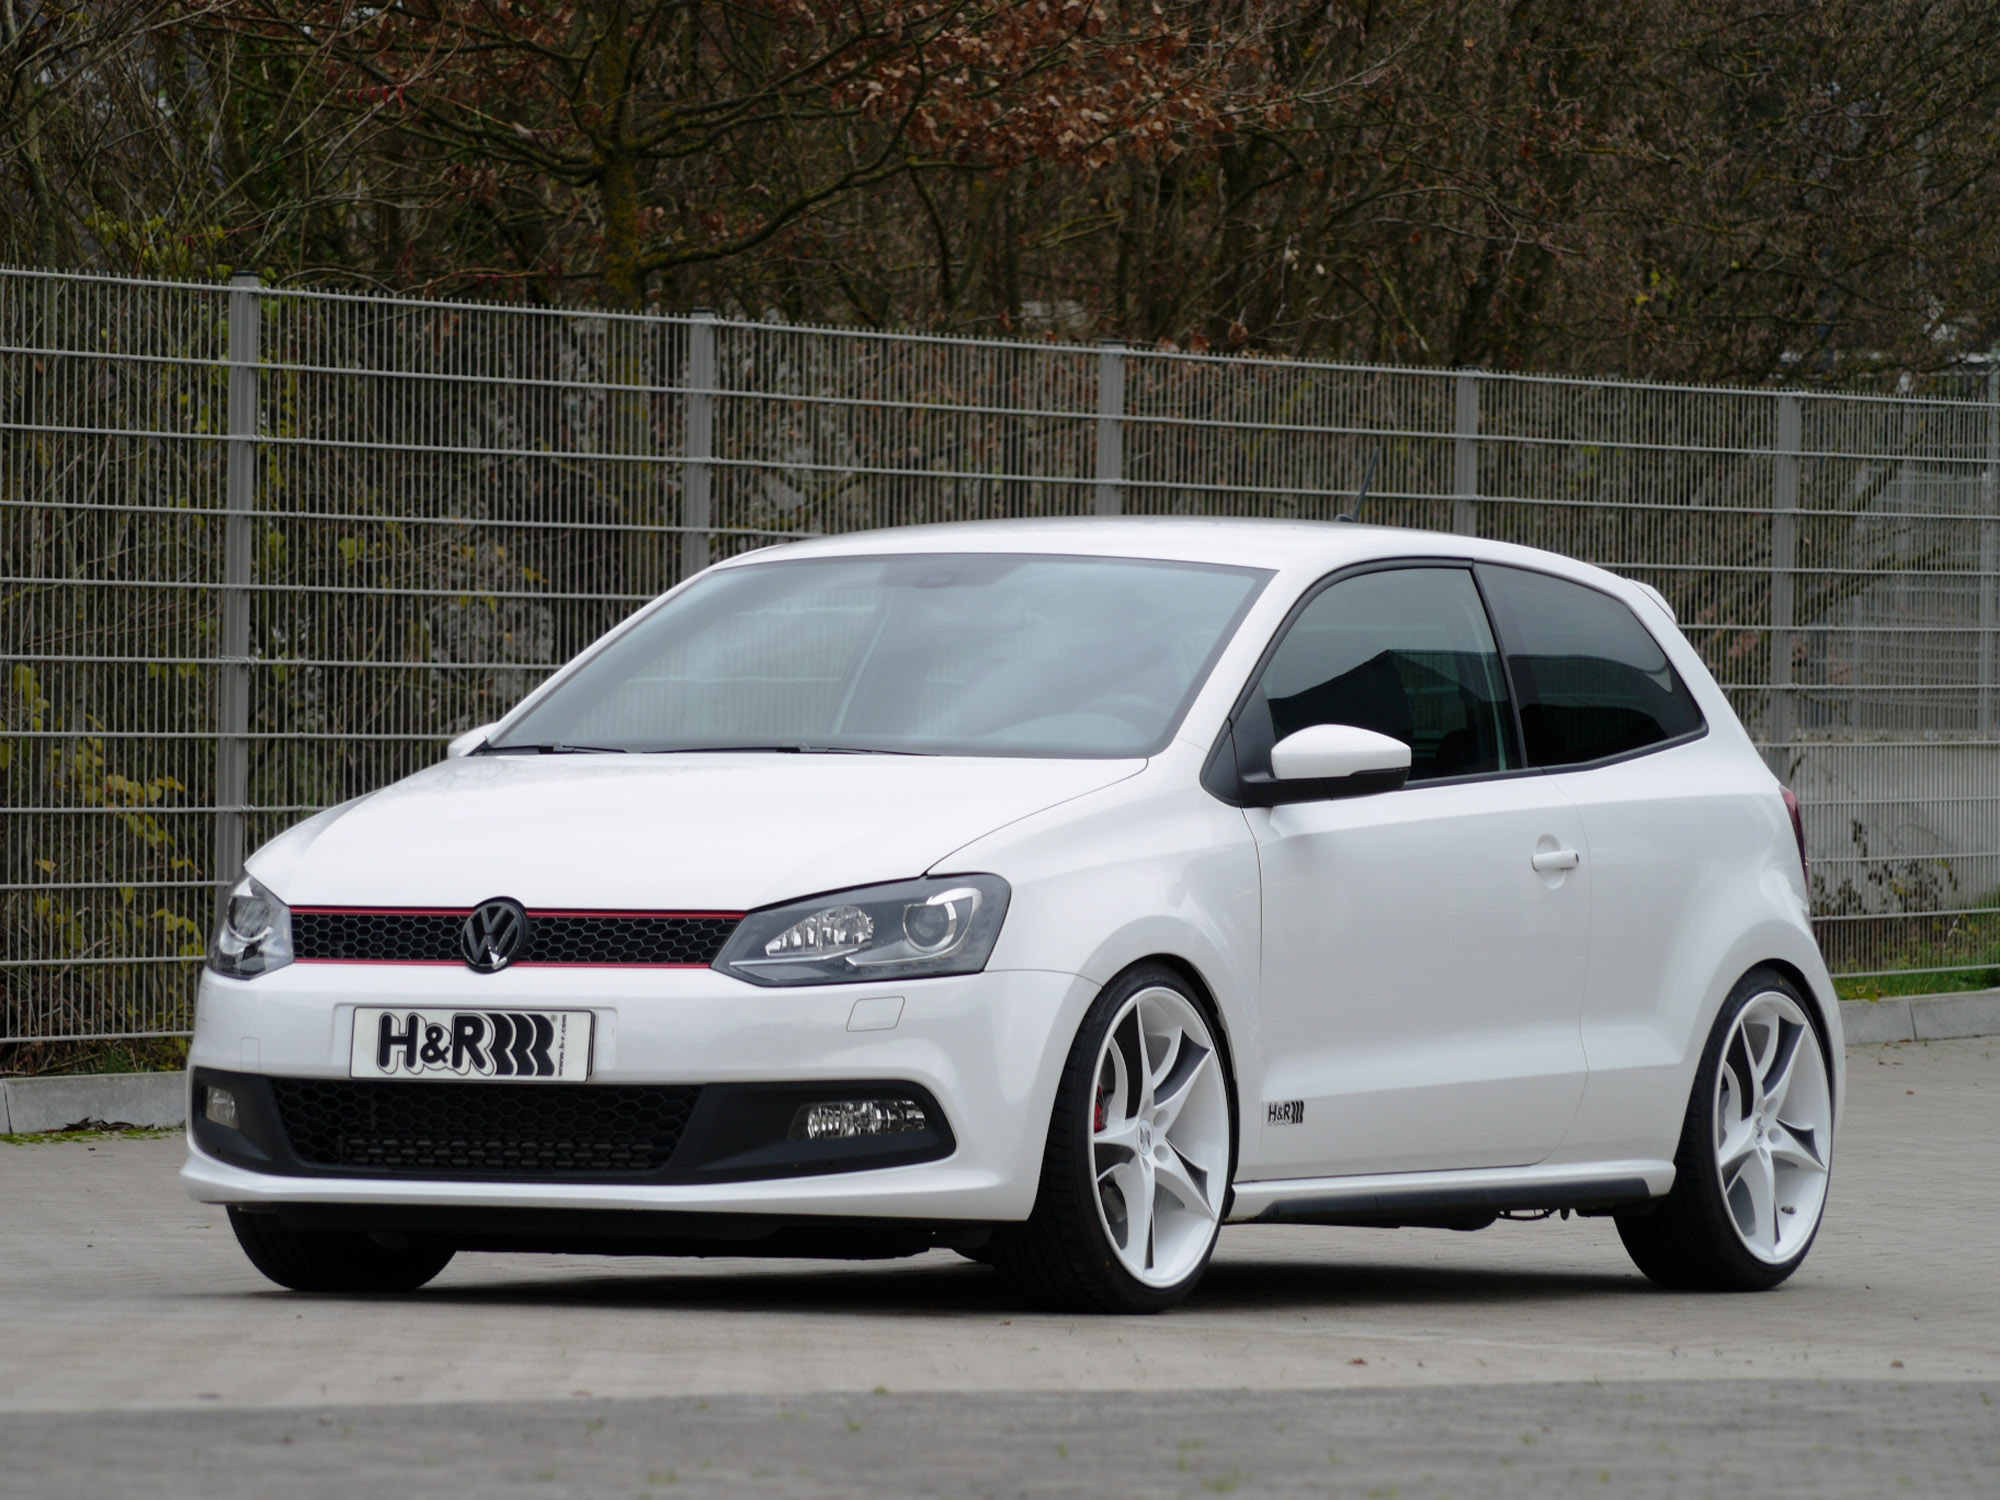 Volkswagen Polo 2010 - Look at the car